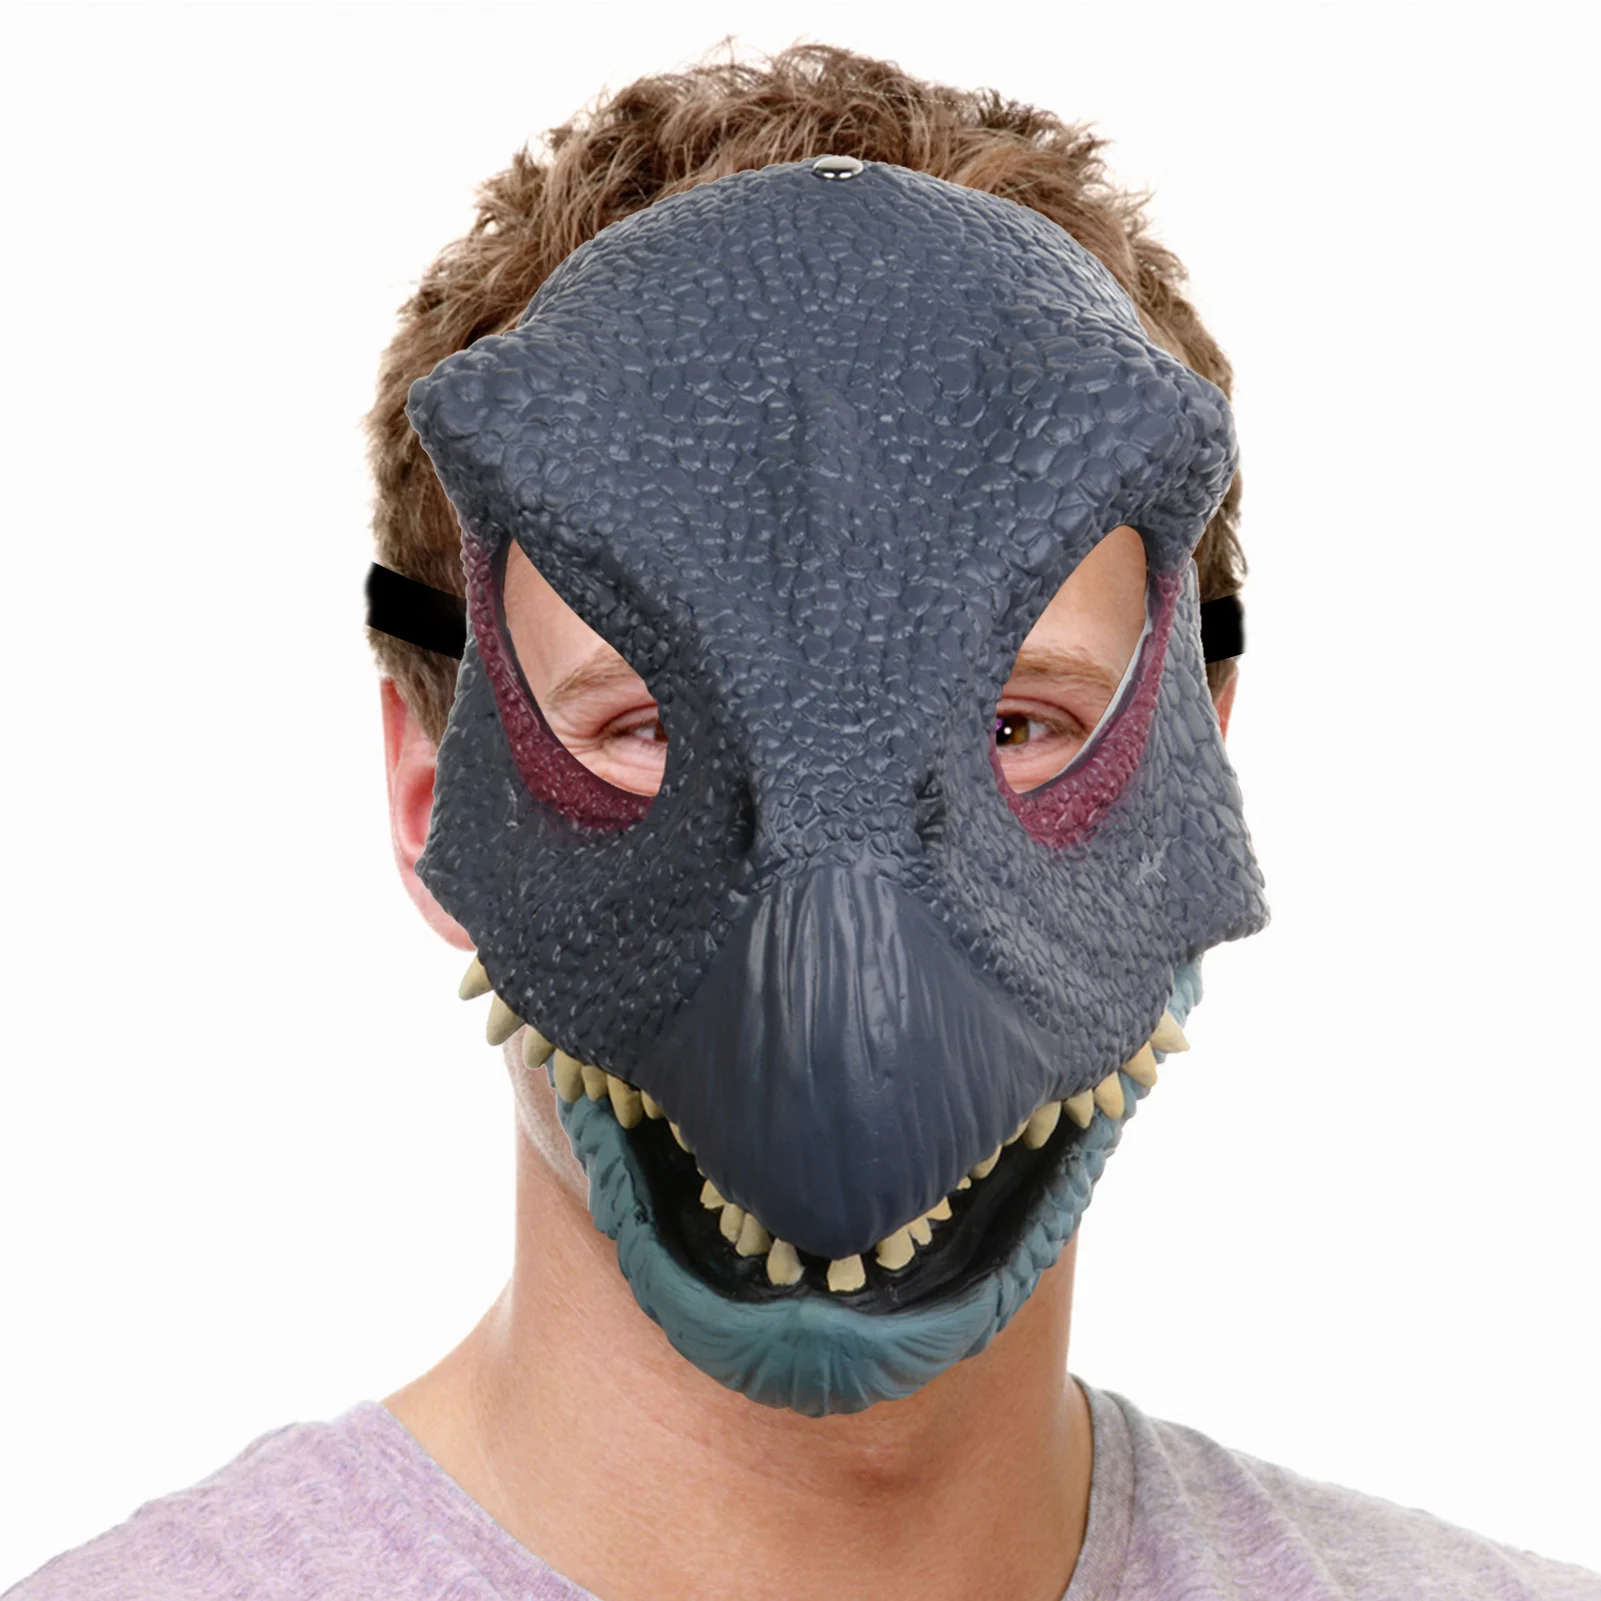 2022 Halloween Dinosaur Mask Open Mouth Mask Horror Hat Masks Supplies For Halloween Festival Party Costume Cosplay _ - AliExpress